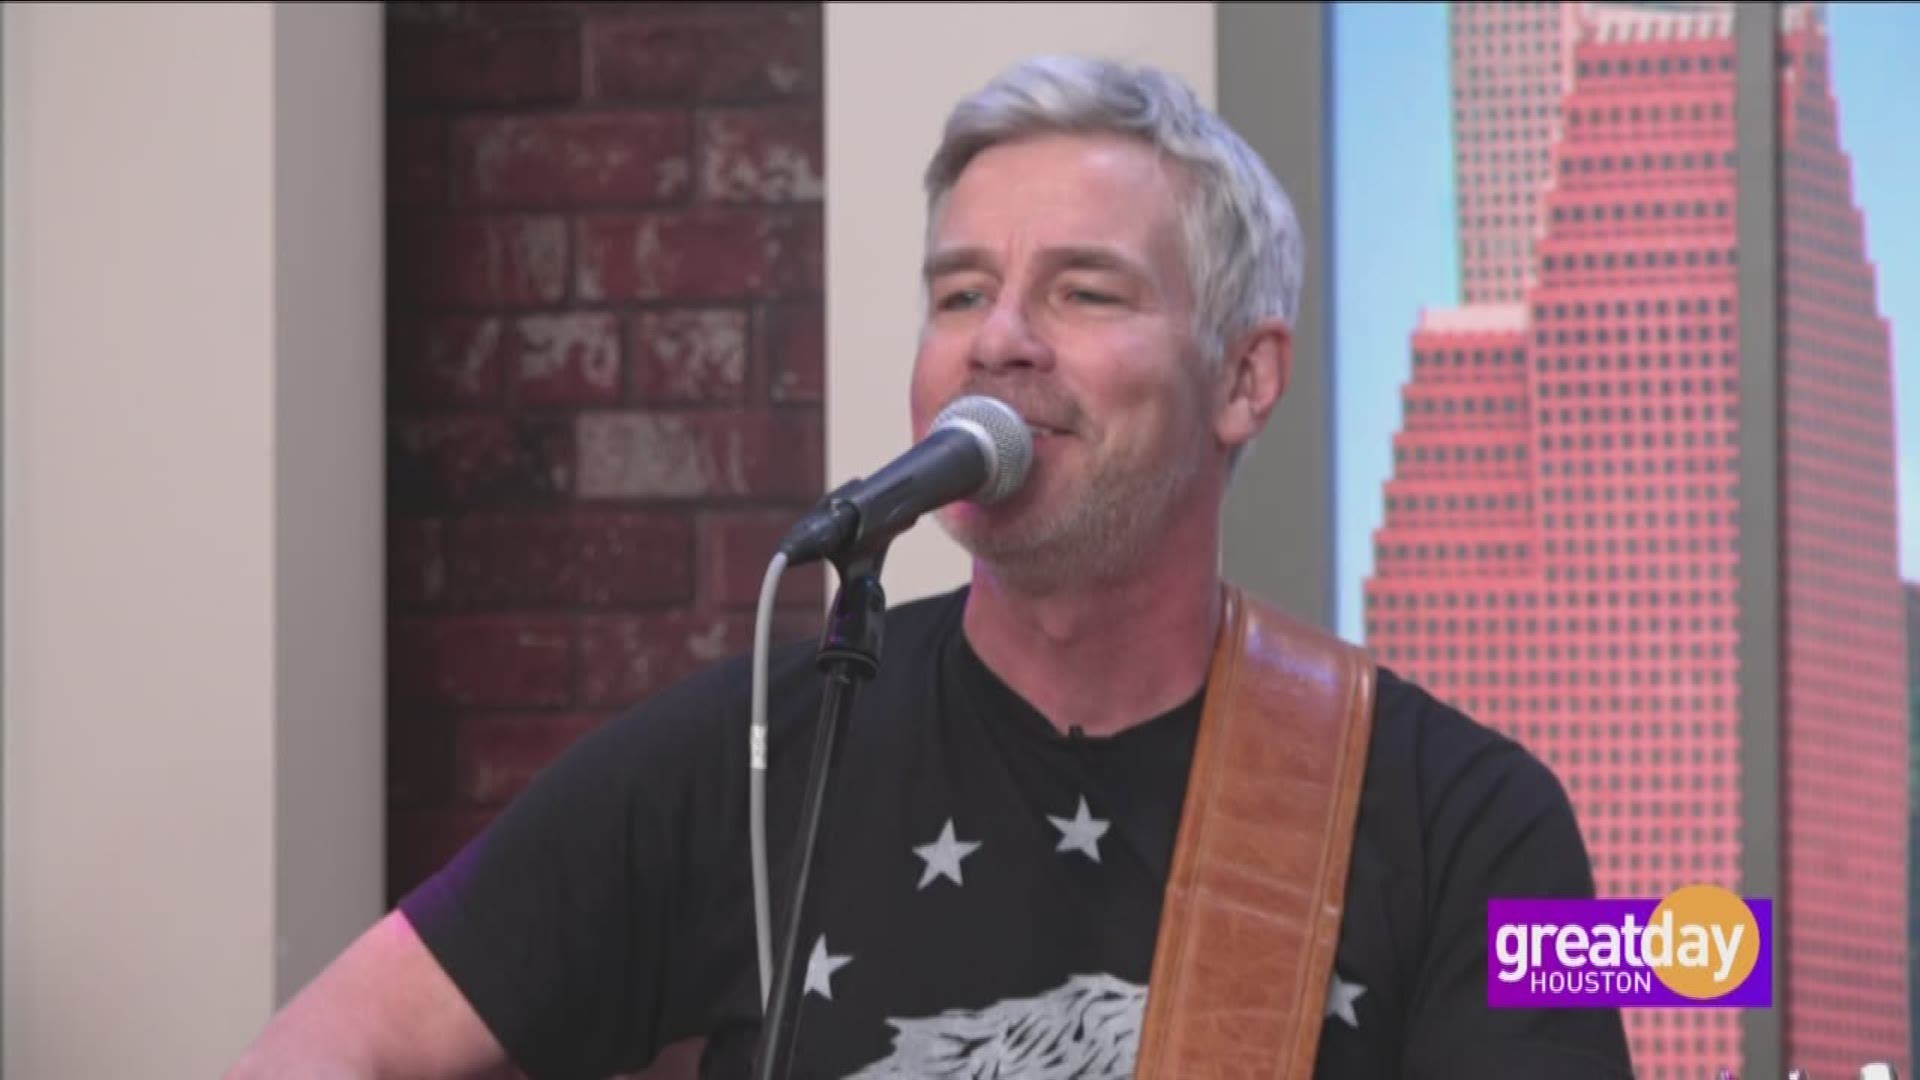 Houston native and "Trivago Guy," Tim Williams, talks his career and new music